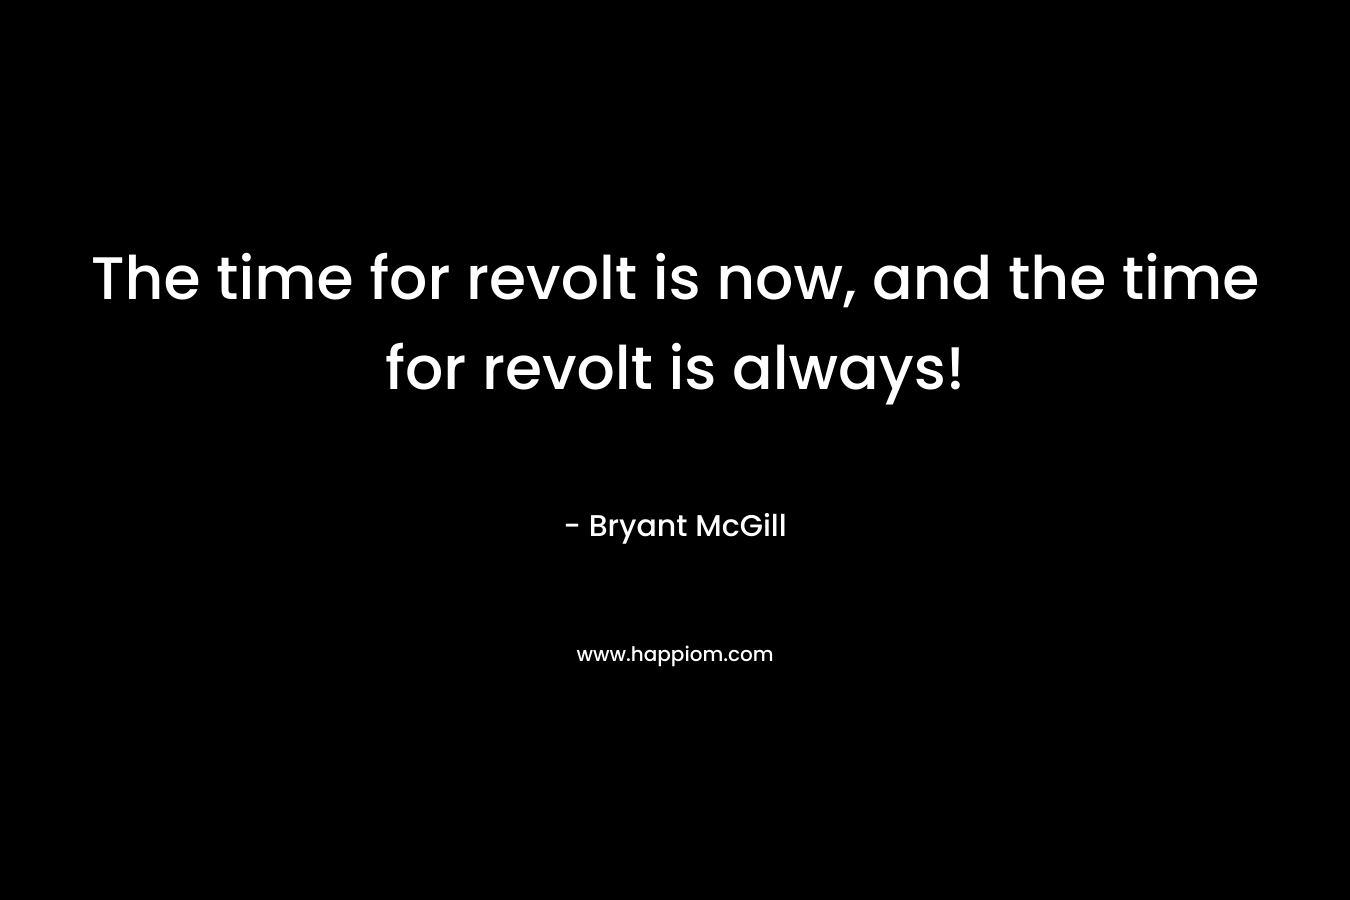 The time for revolt is now, and the time for revolt is always!